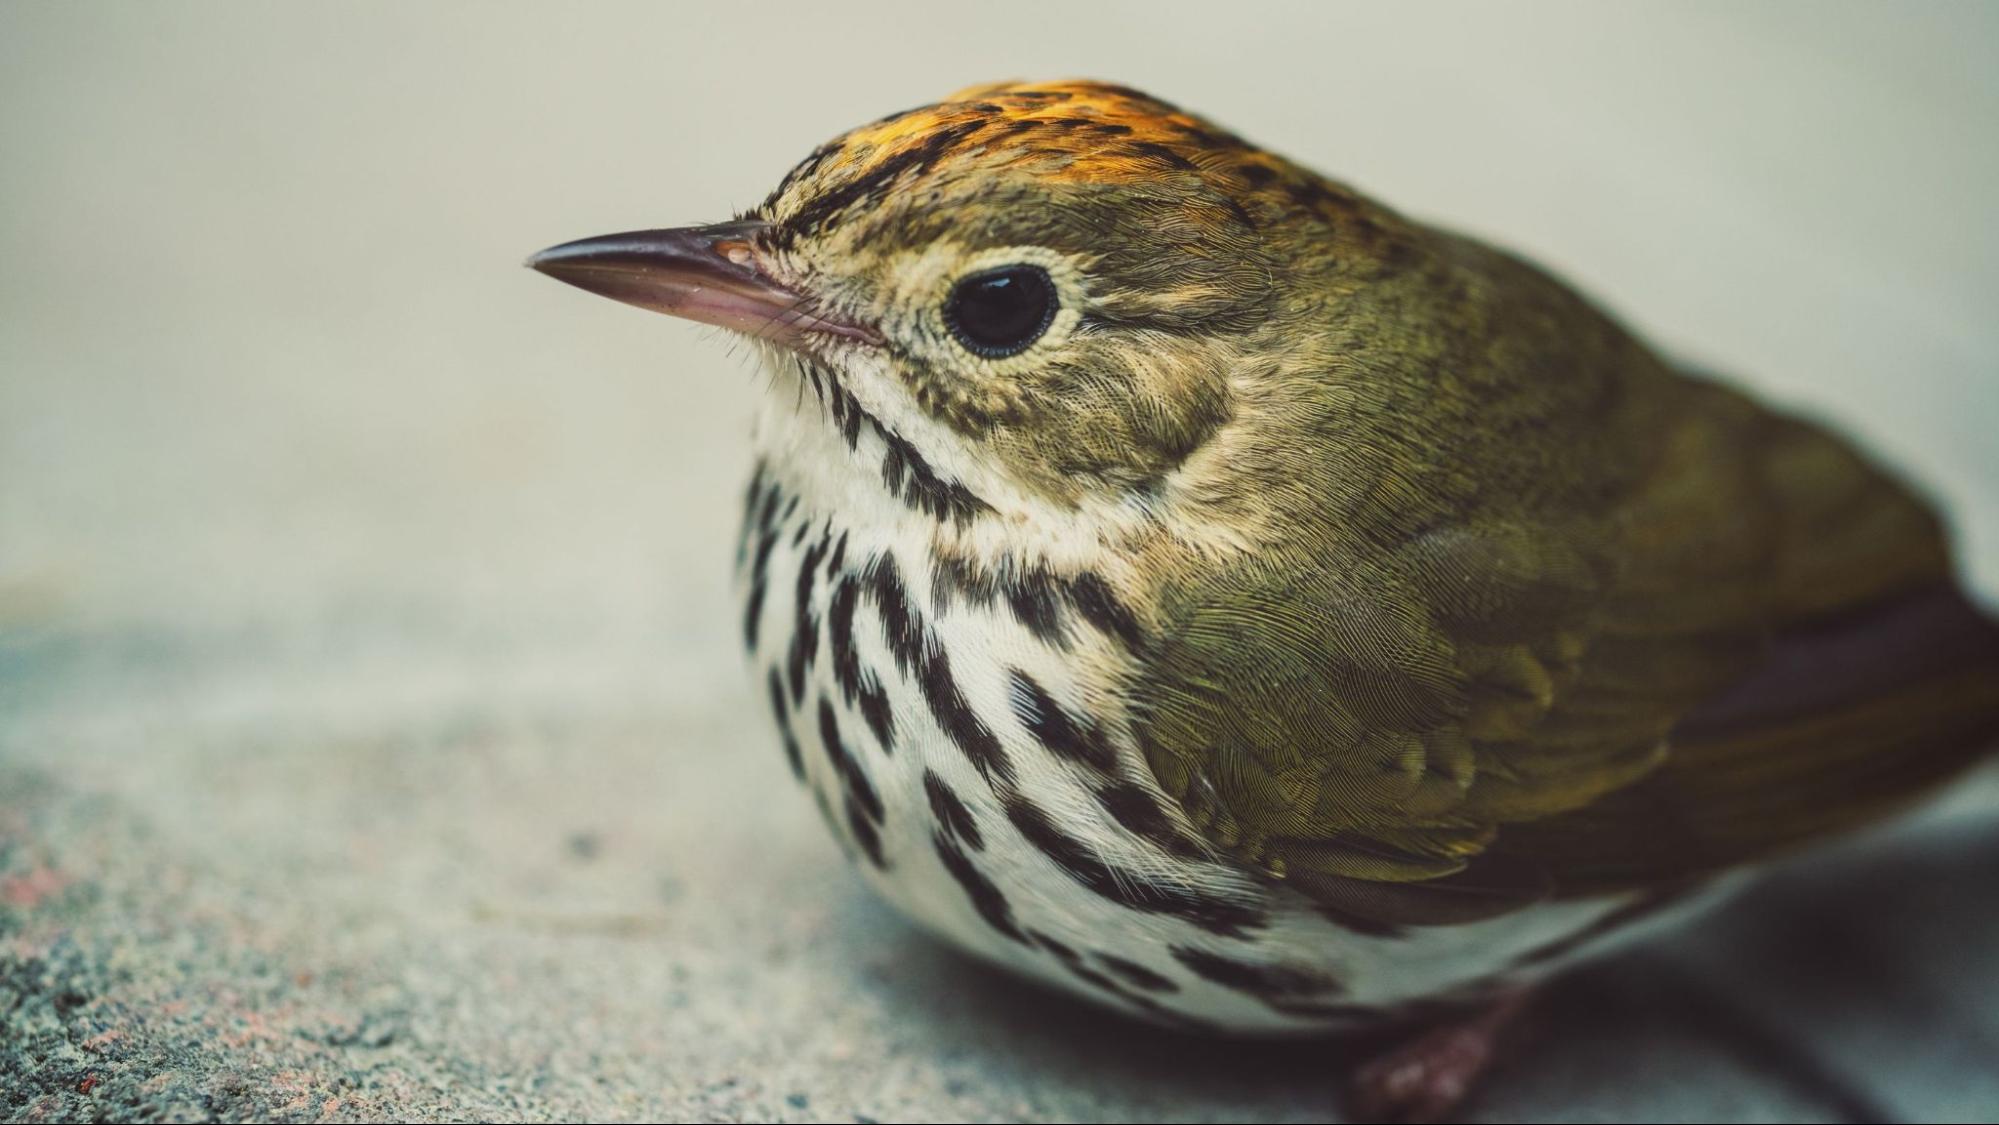 Closeup of an Ovenbird. Photo: shaunl from Getty Images Signature